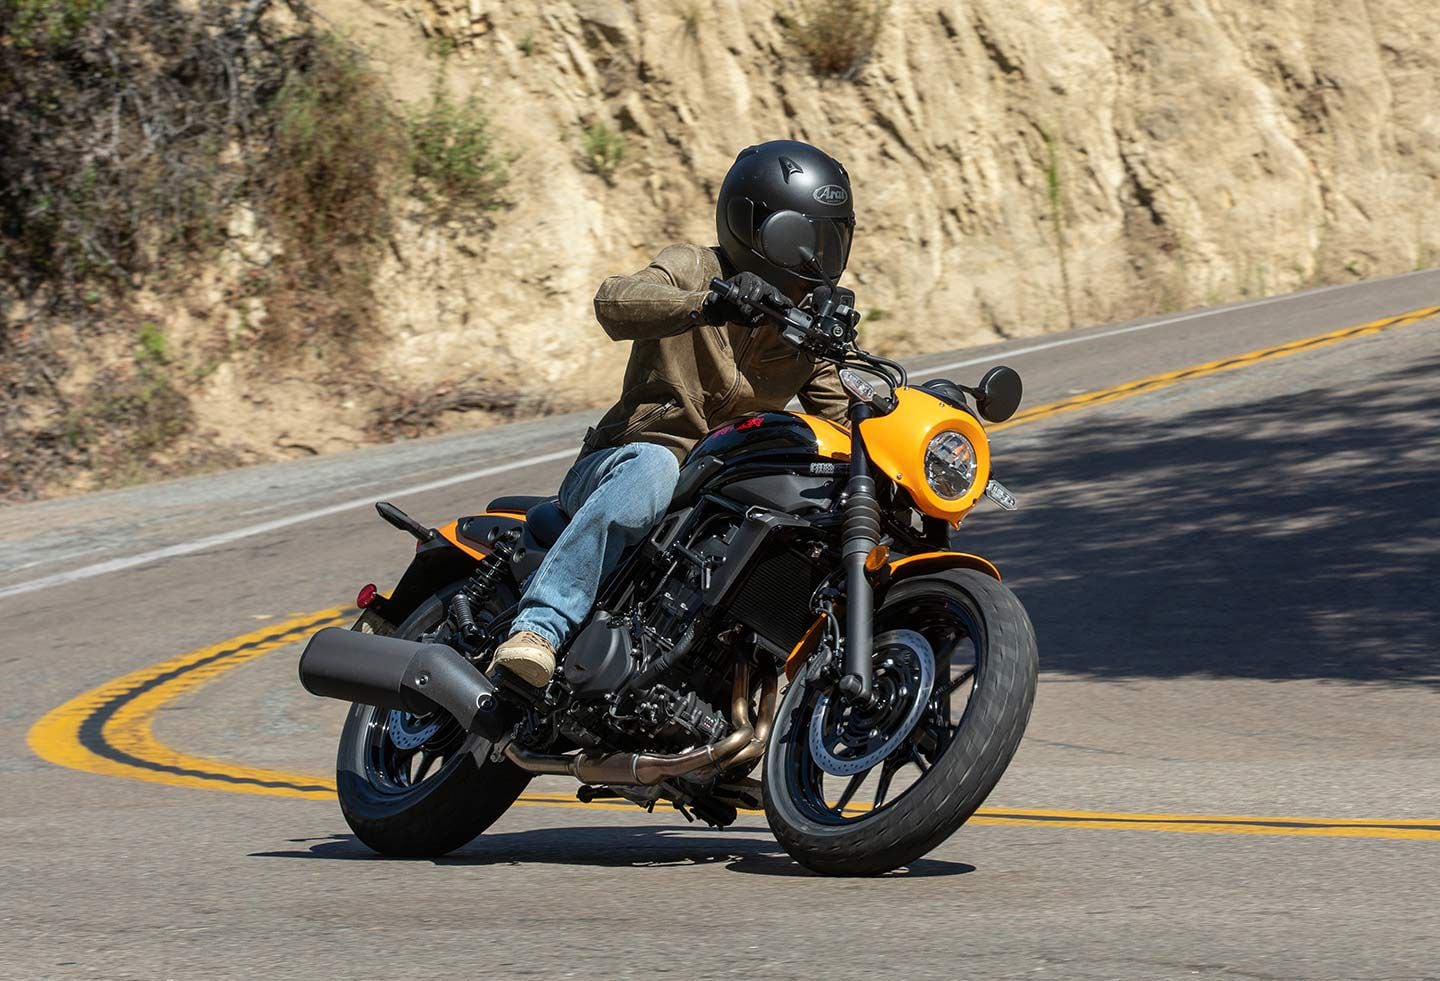 Kawasaki’s all-new Eliminator is just as comfortable on twisty backroads as it is in city traffic.